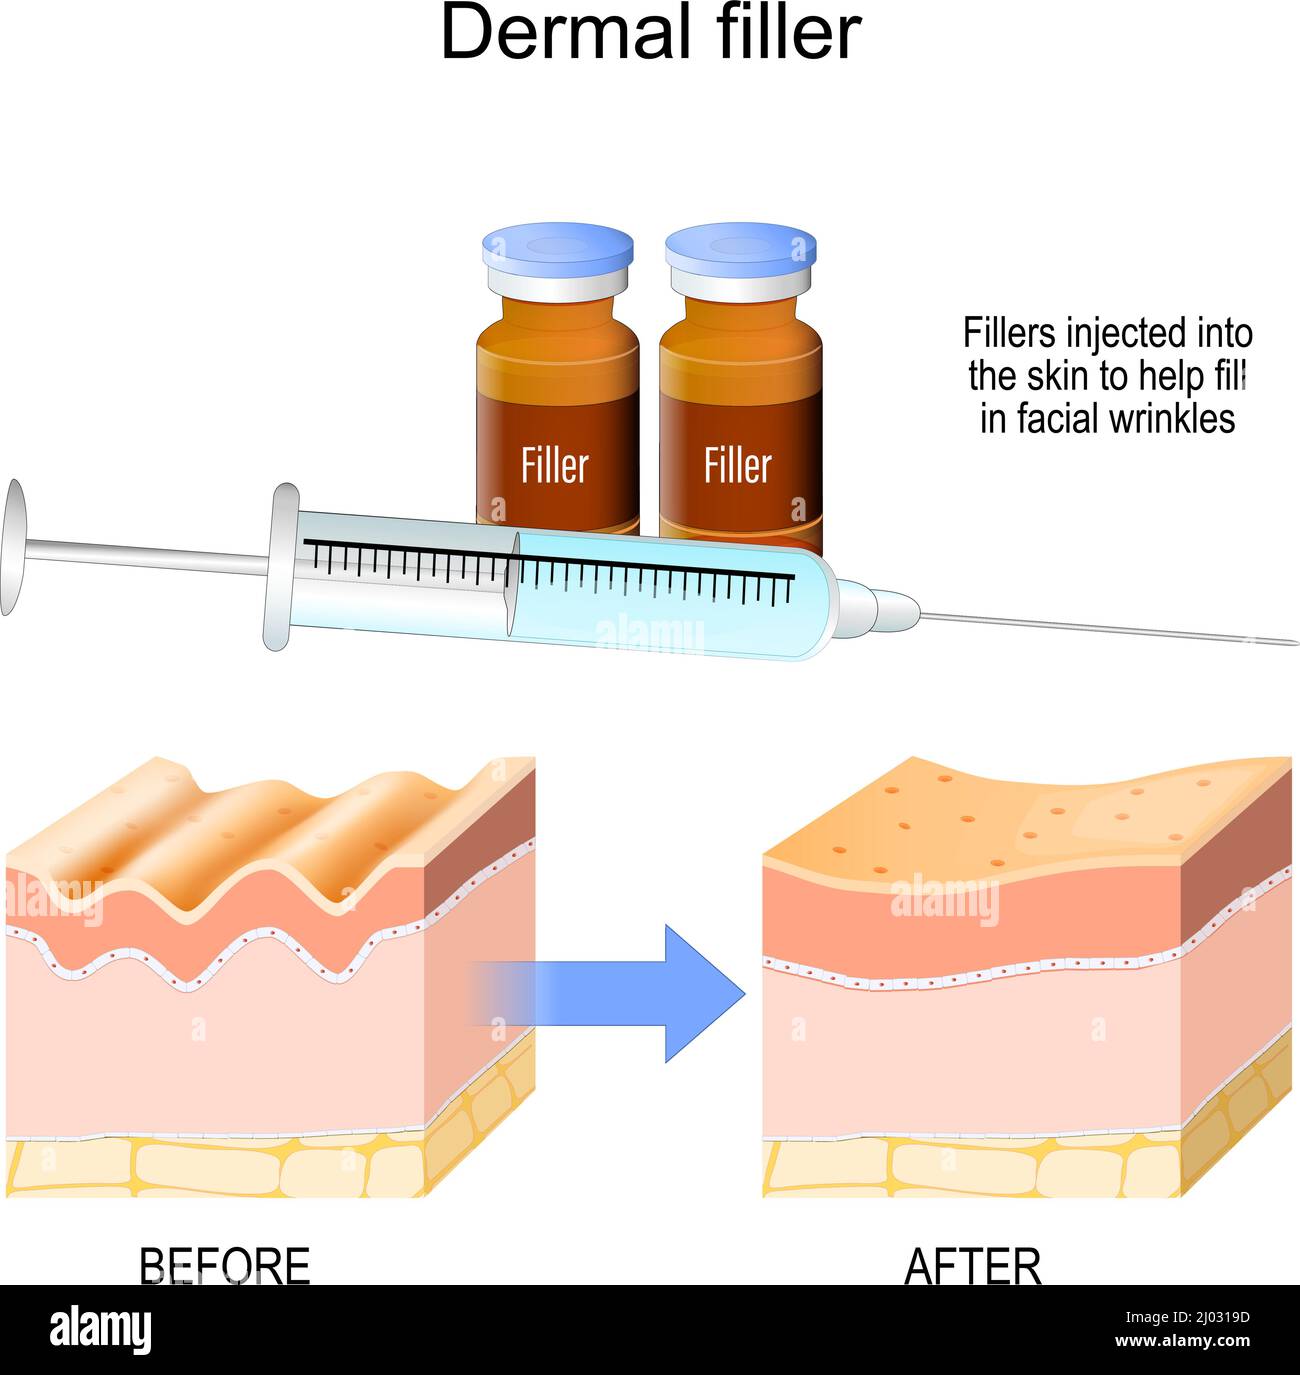 Dermal filler. Fillers injected into the skin to help fill in facial wrinkles. Cross section of the skin before and after injection. syringe Stock Vector